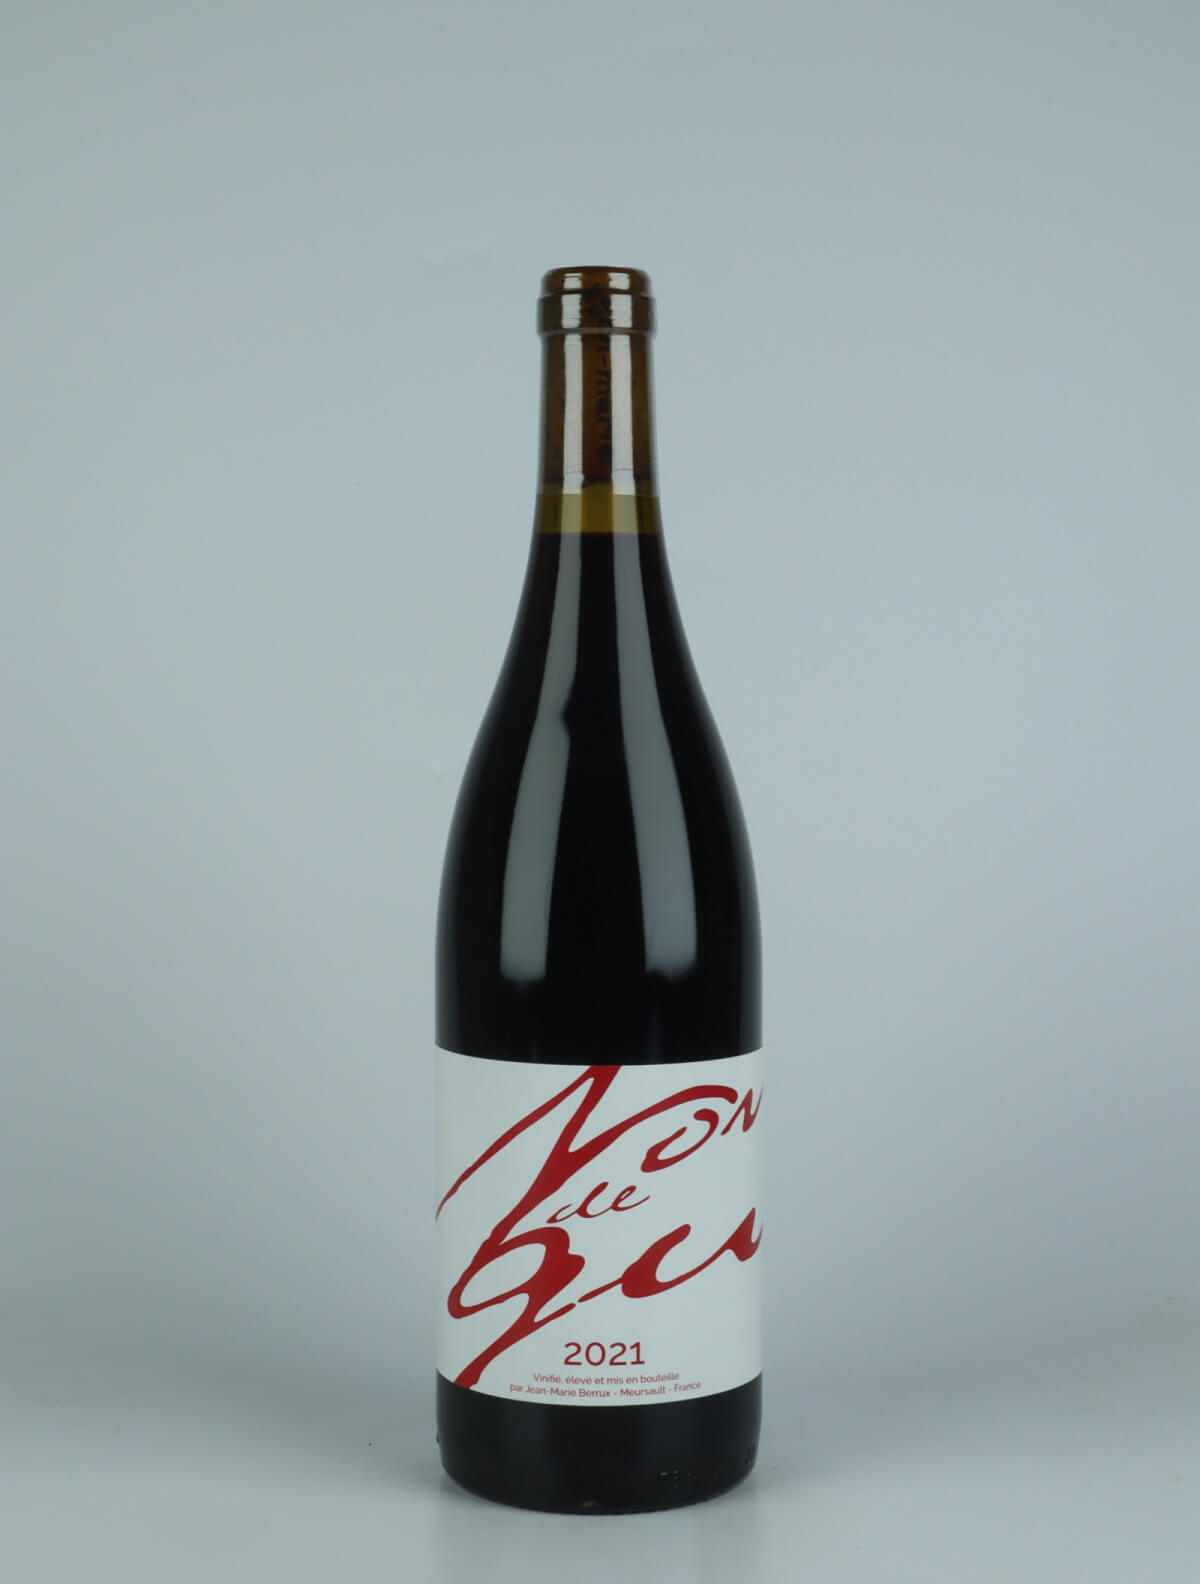 A bottle 2021 Nondegu Red wine from Jean-Marie Berrux, Burgundy in France